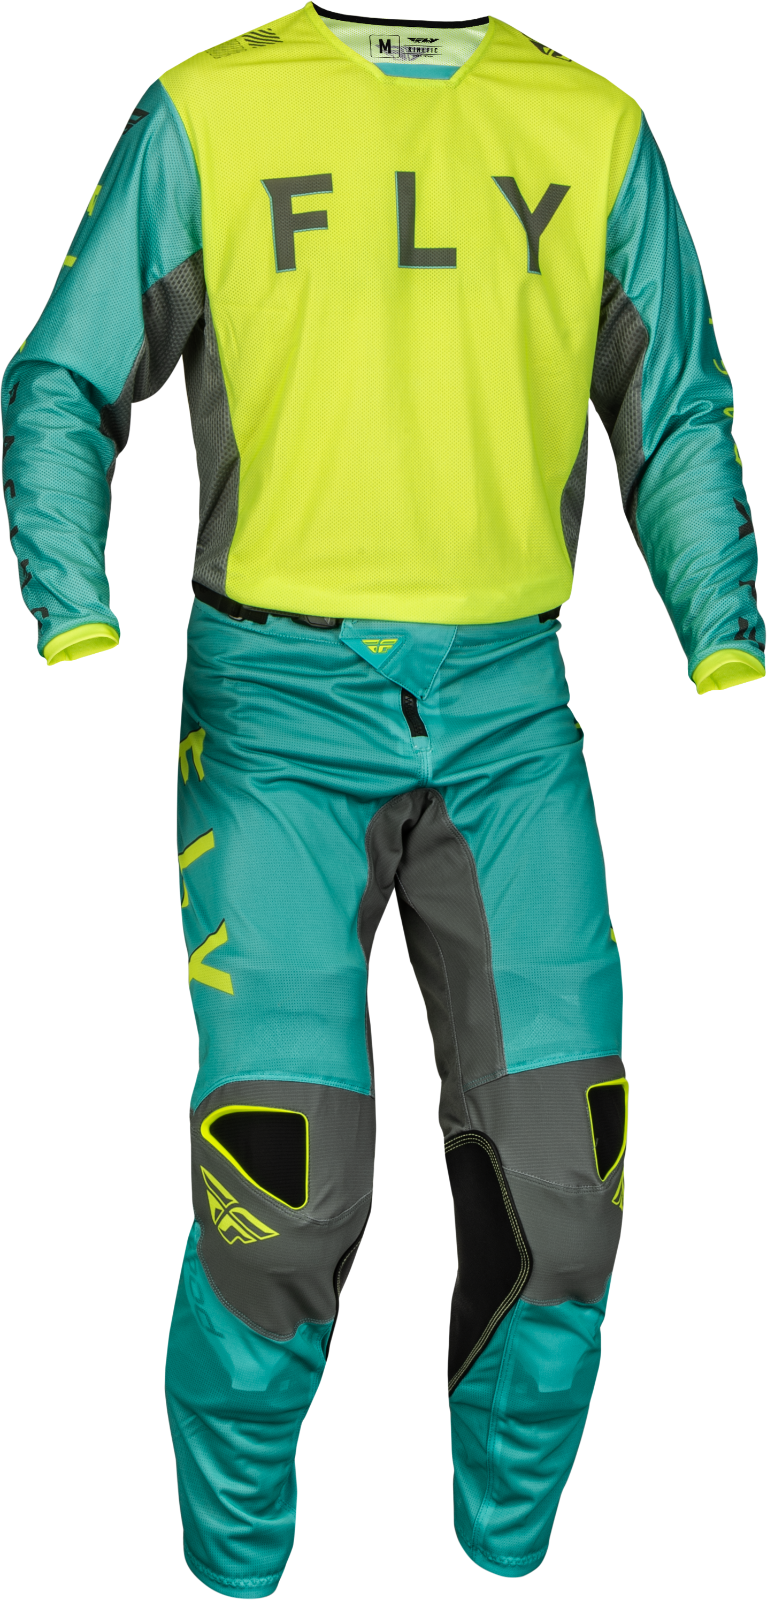 Fly Racing Kinetic Mesh Adult Moto Gear Set - Pant and Jersey Combo